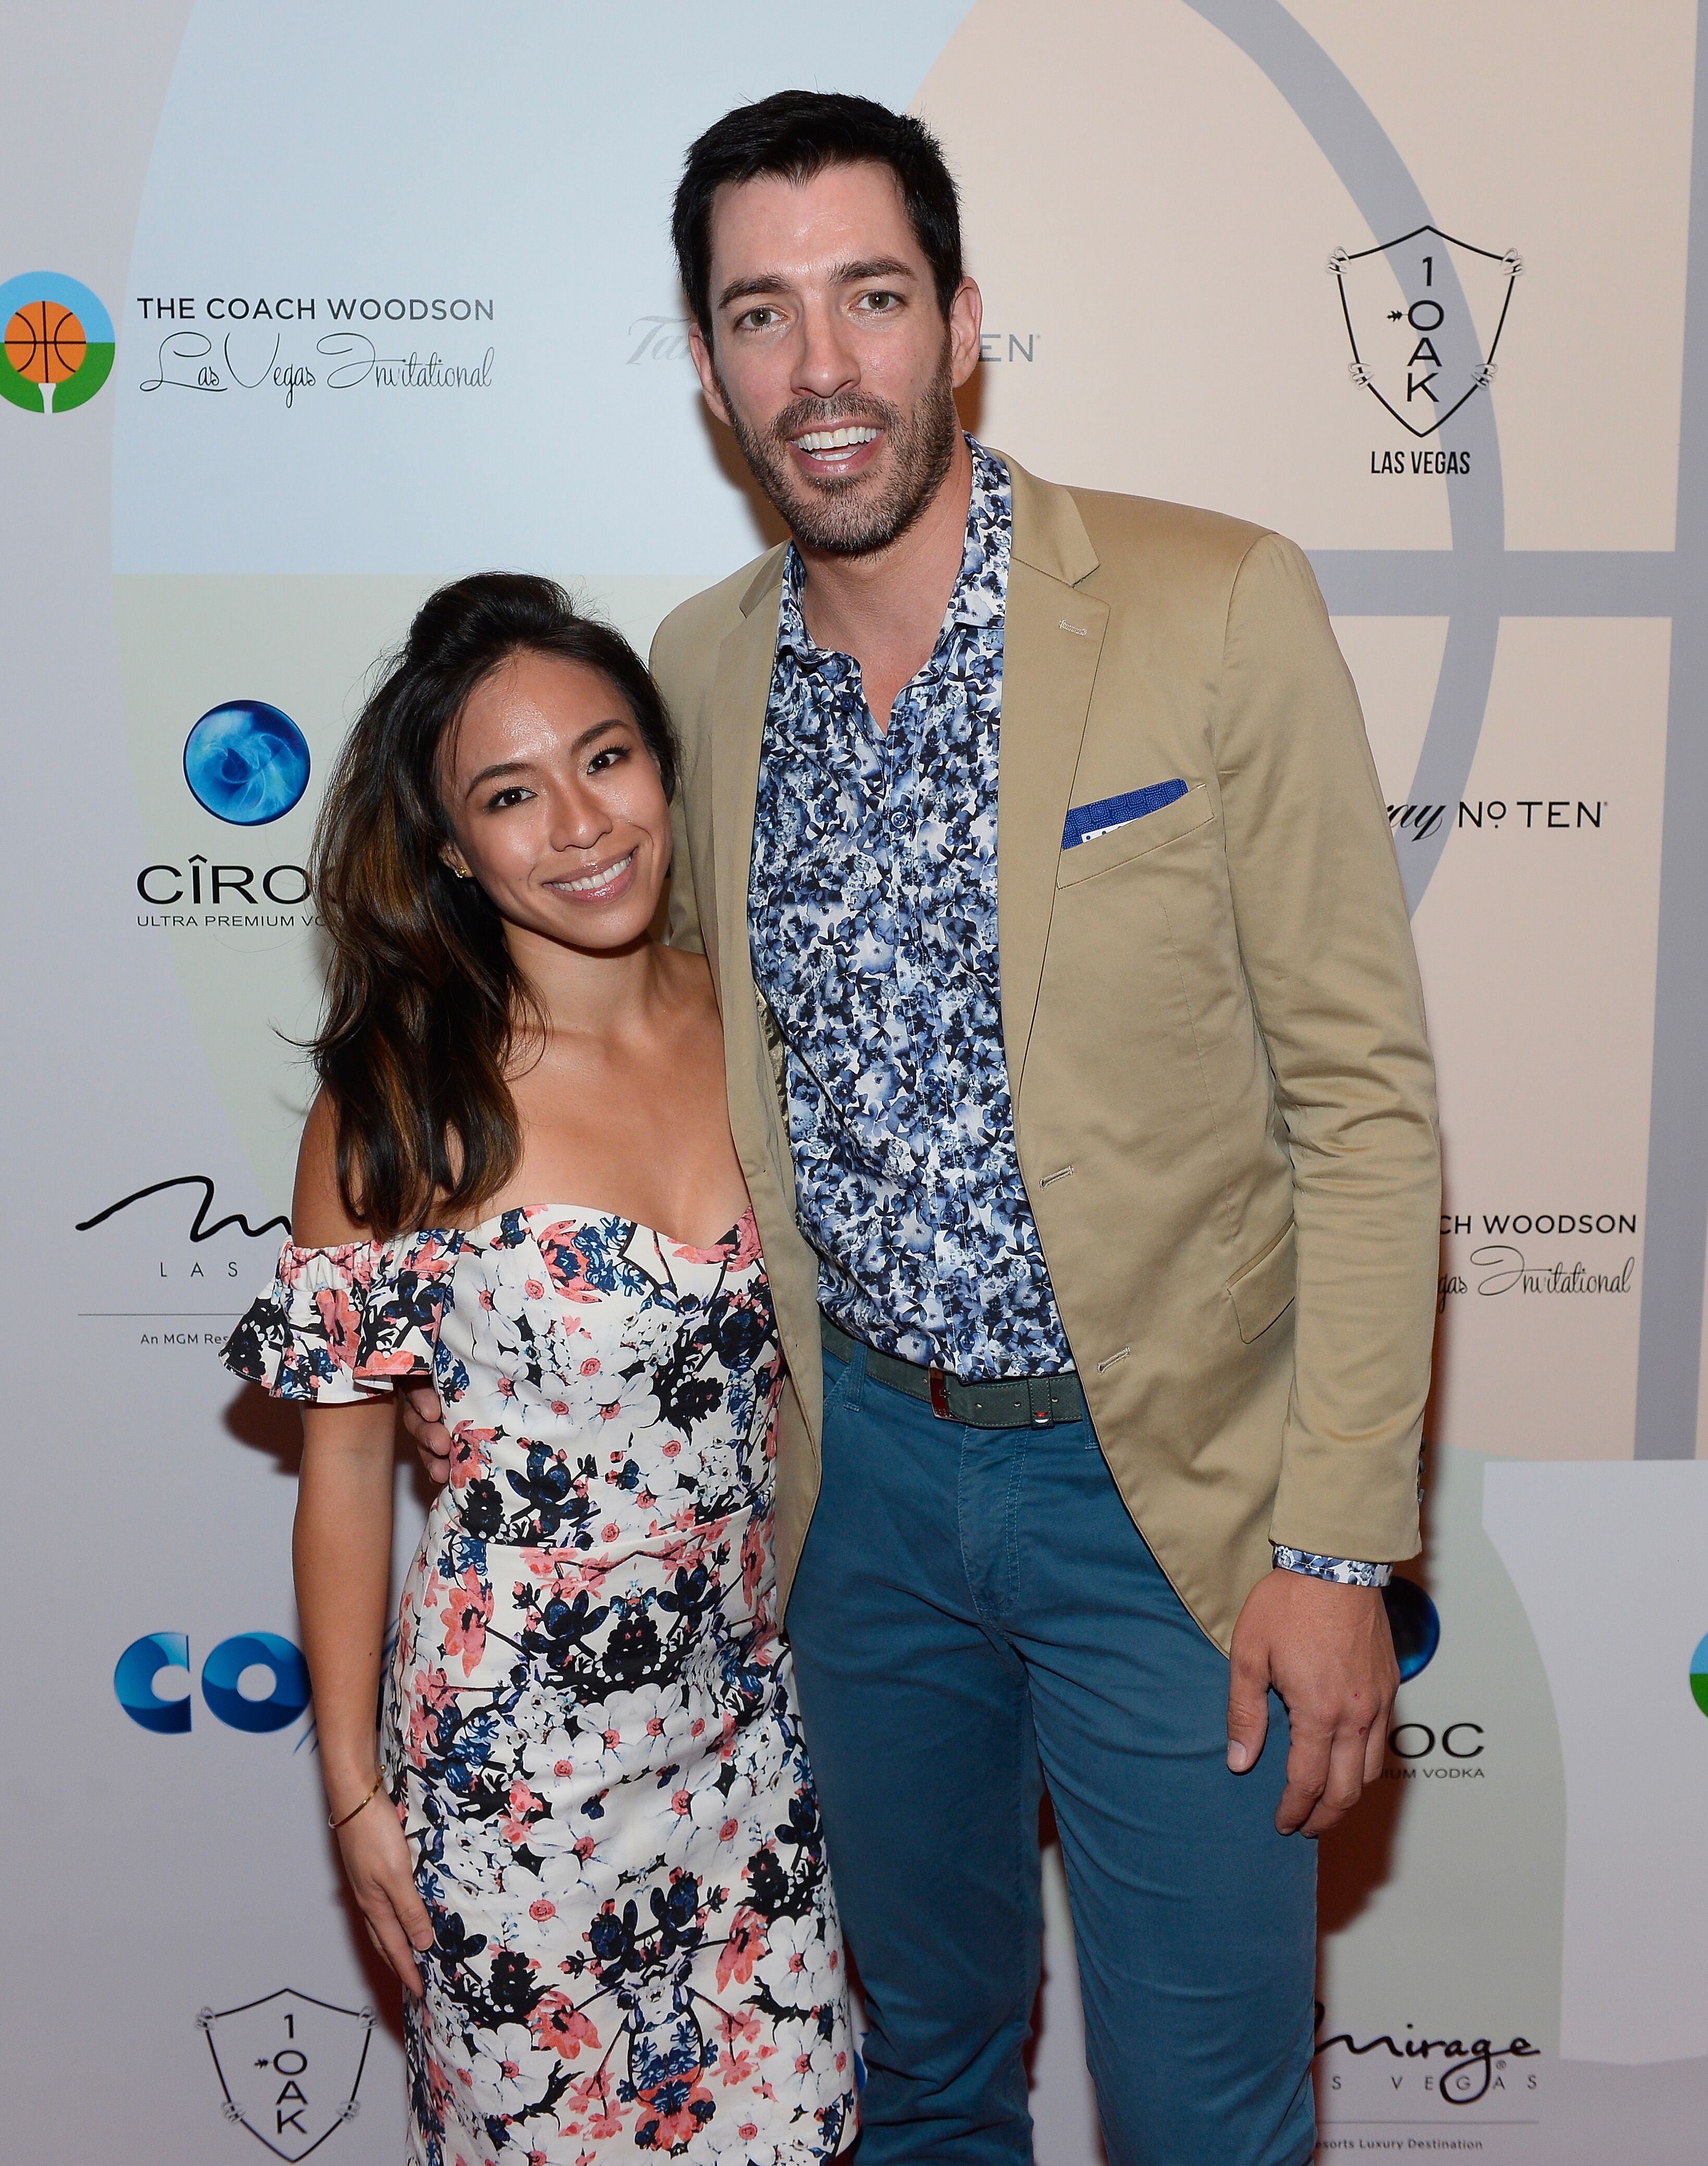 Linda Phan and Drew Scott at the Coach Woodson Las Vegas Invitational red carpet on July 8, 2017. | Photo: Getty Images